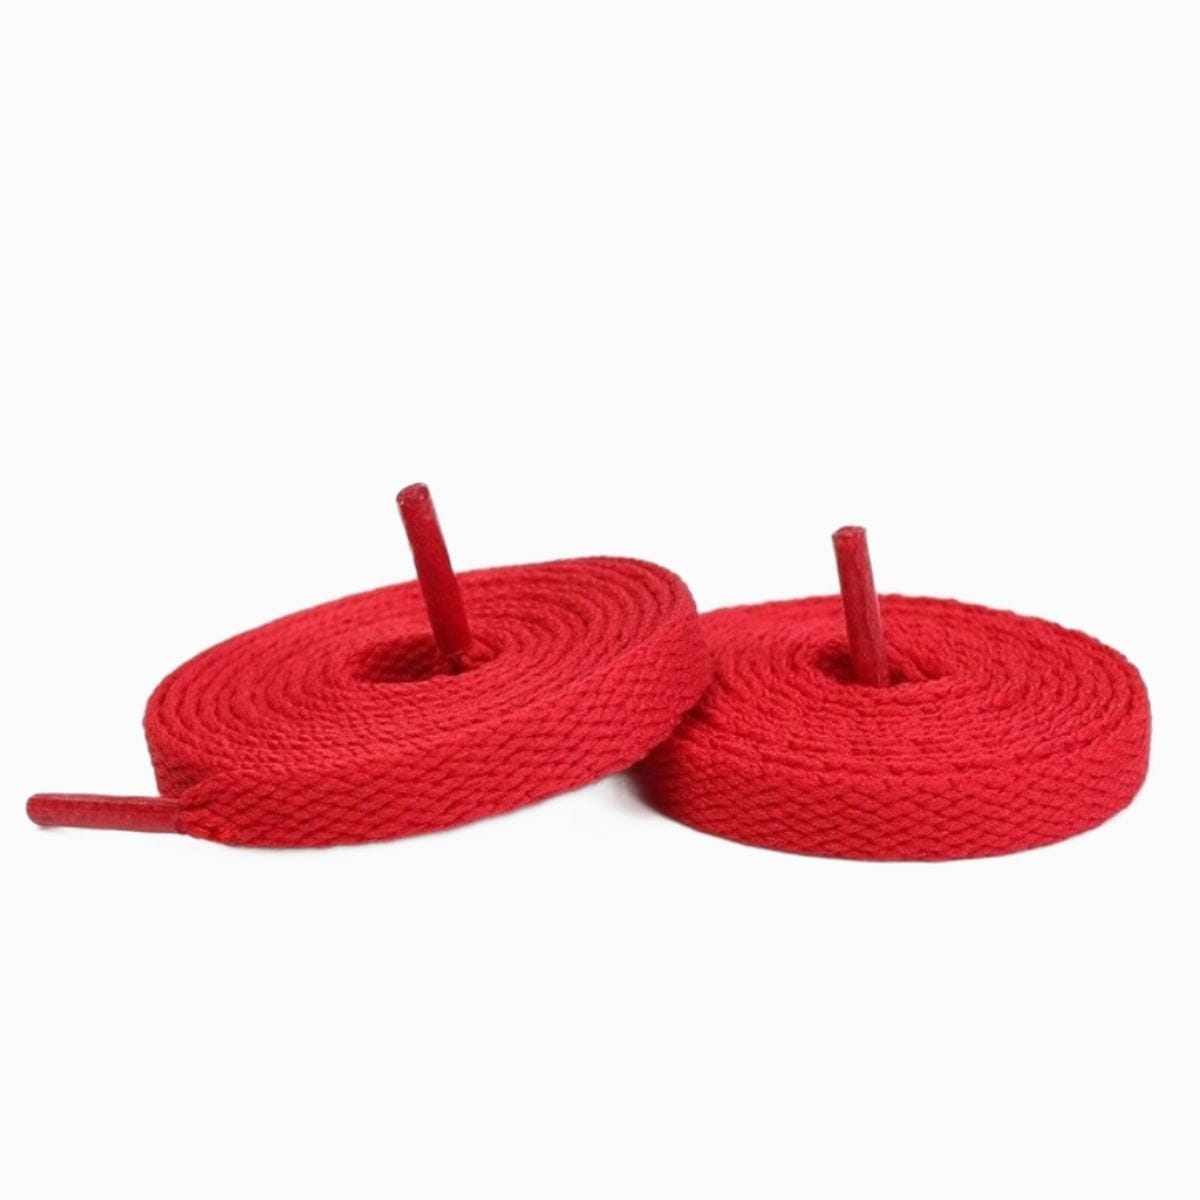 Red Replacement Laces for Adidas Continental 80 Sneakers by Kicks Shoelaces